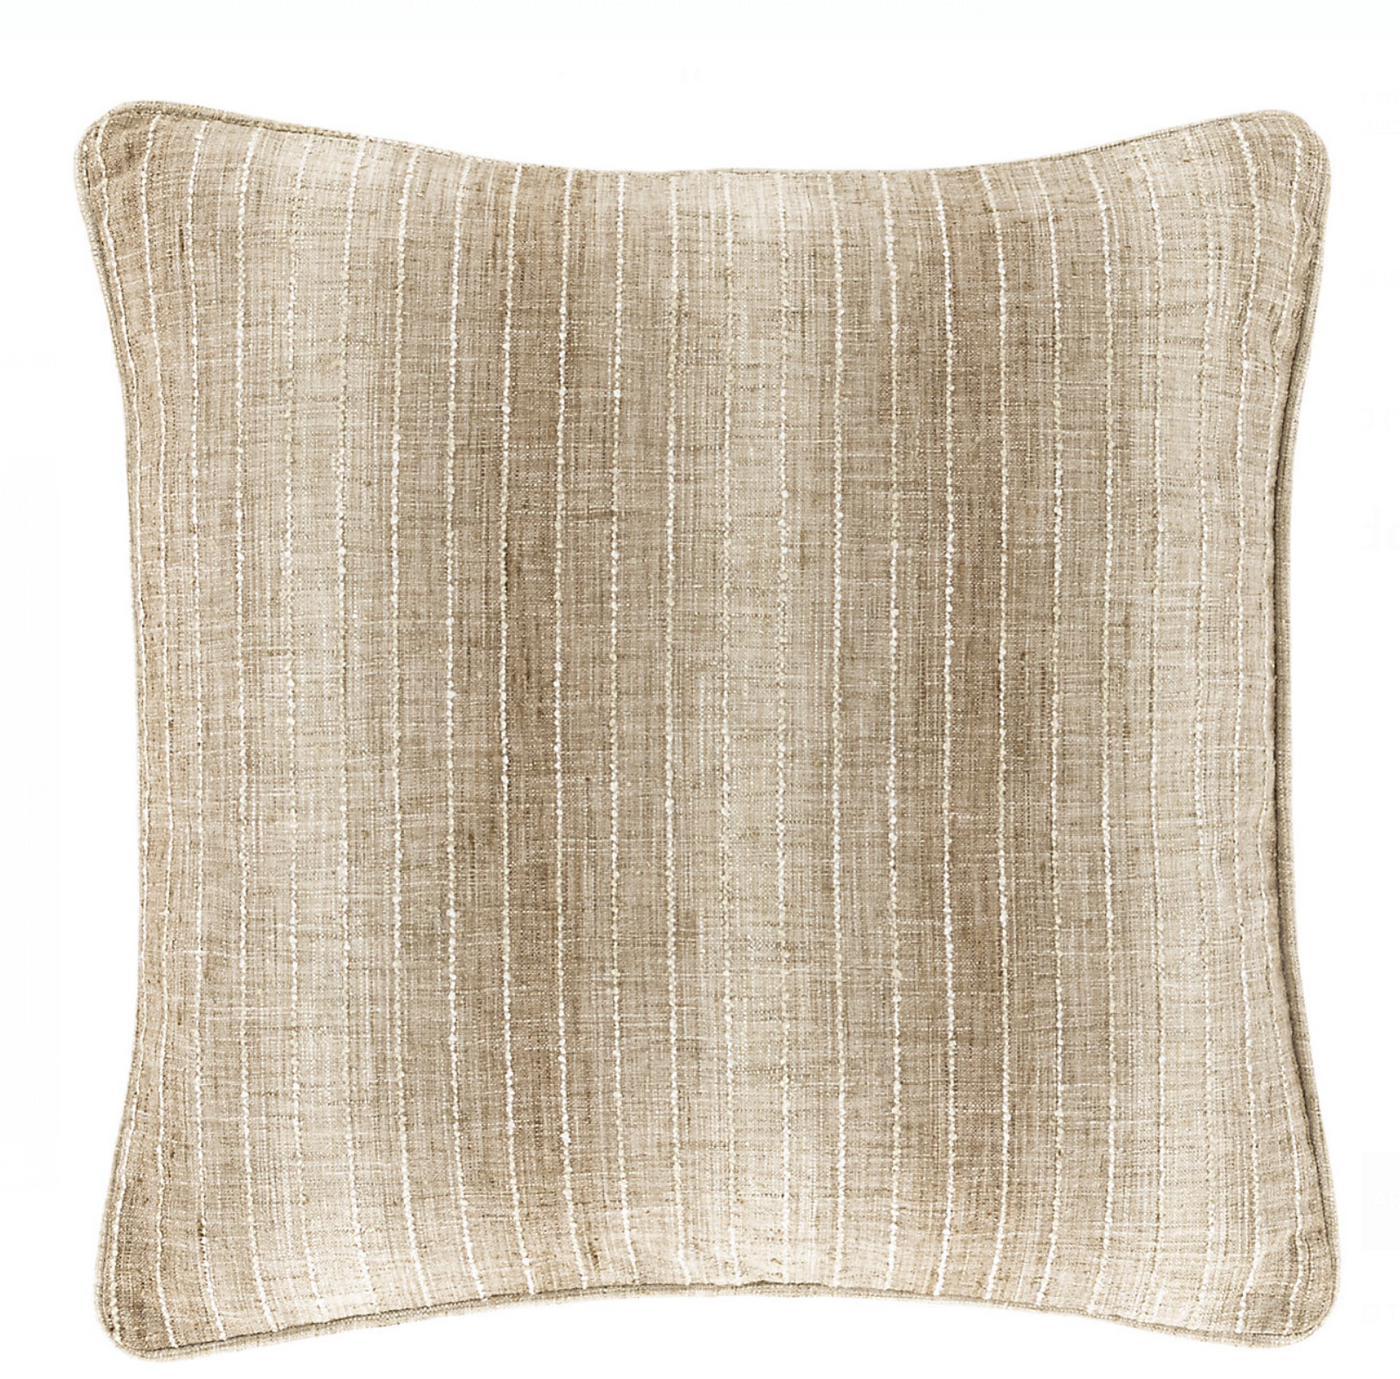 PILLOW DECORATIVE INDOOR/OUTDOOR VINTAGE STRIPE (Available in 2 Colors)